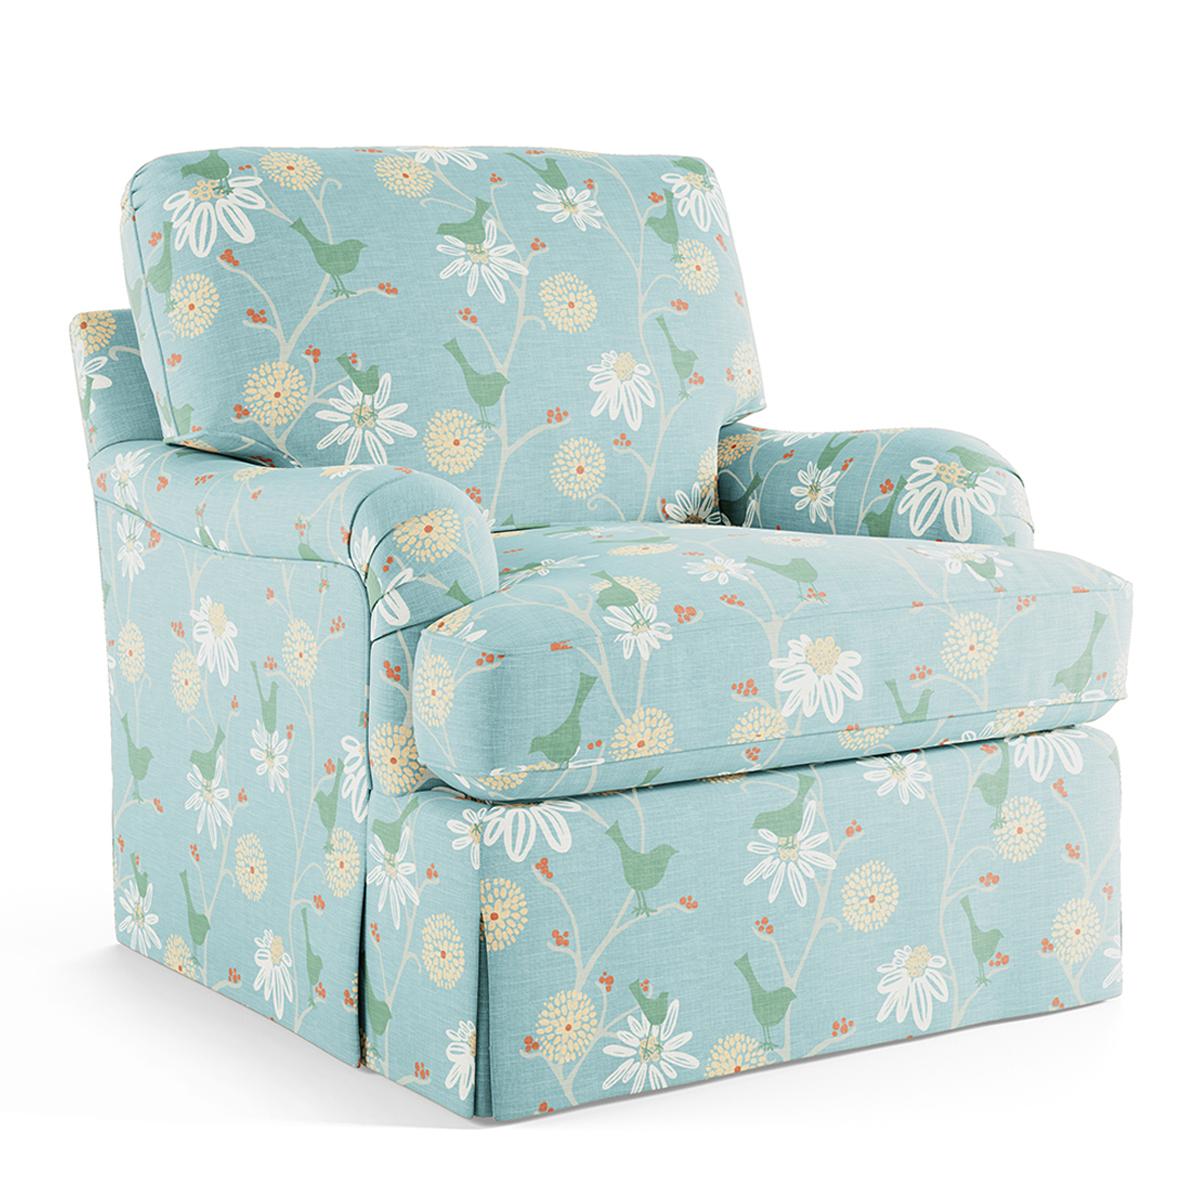 Maine Cottage Flora Chair | Coastal Cottage Style Chair | Living Room Chair 